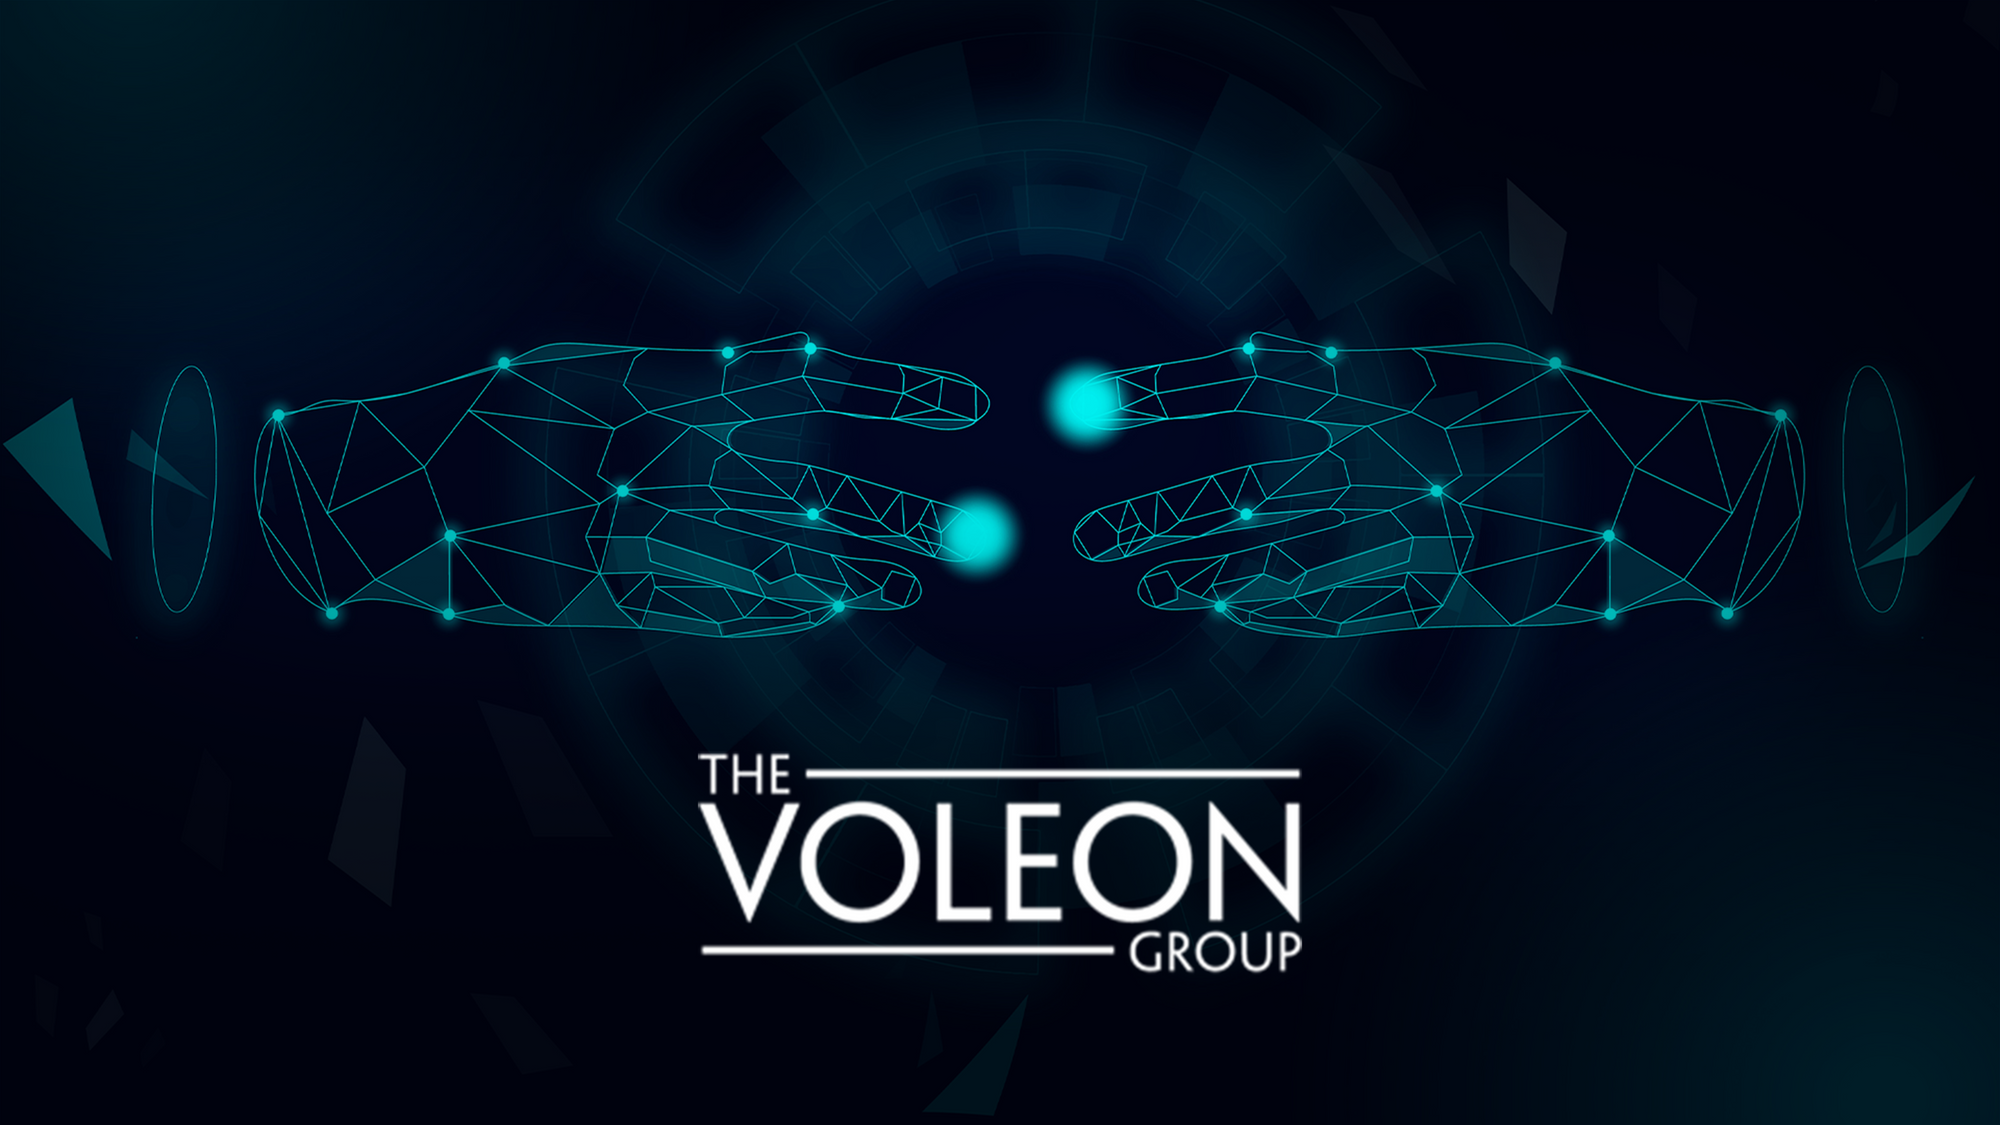 Goodbye to Monopoly Money - Earn the Real Deal with Voleon